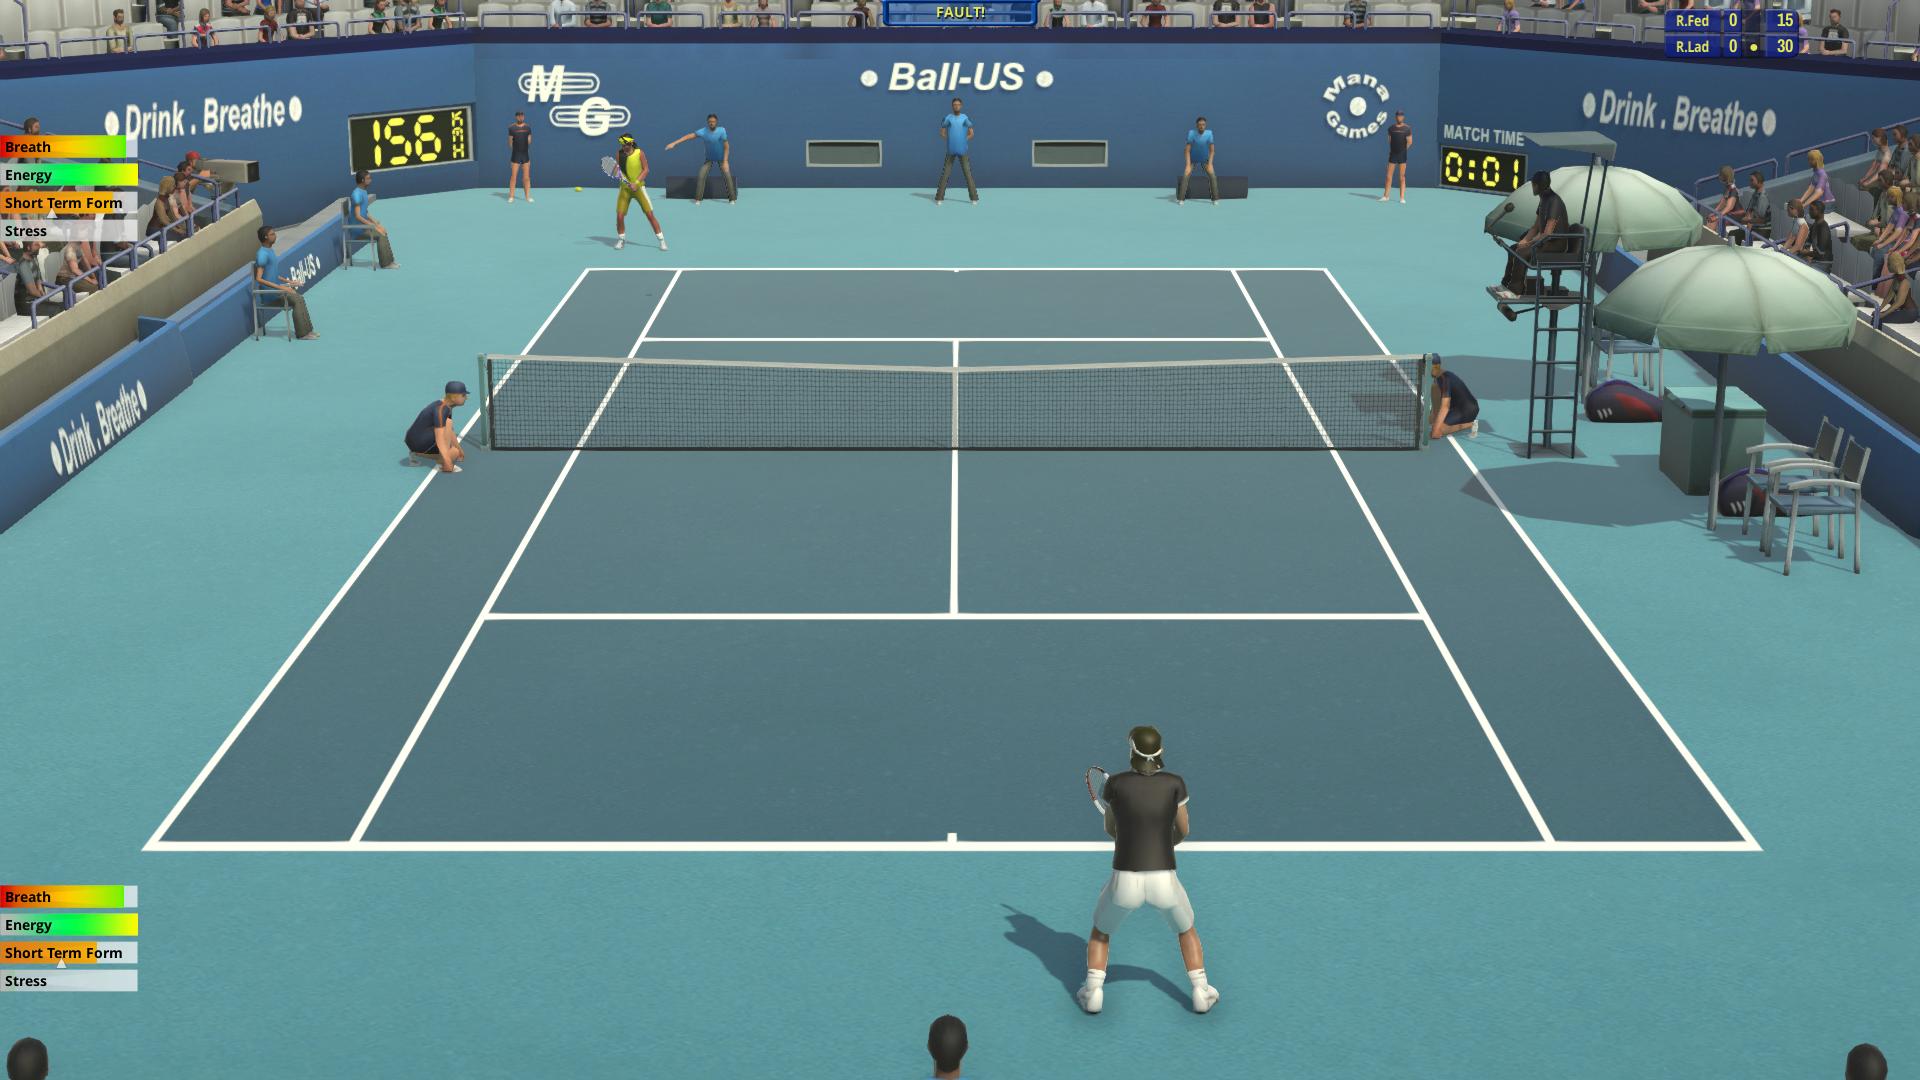 Save 55% on Tennis Elbow Manager 2 on Steam